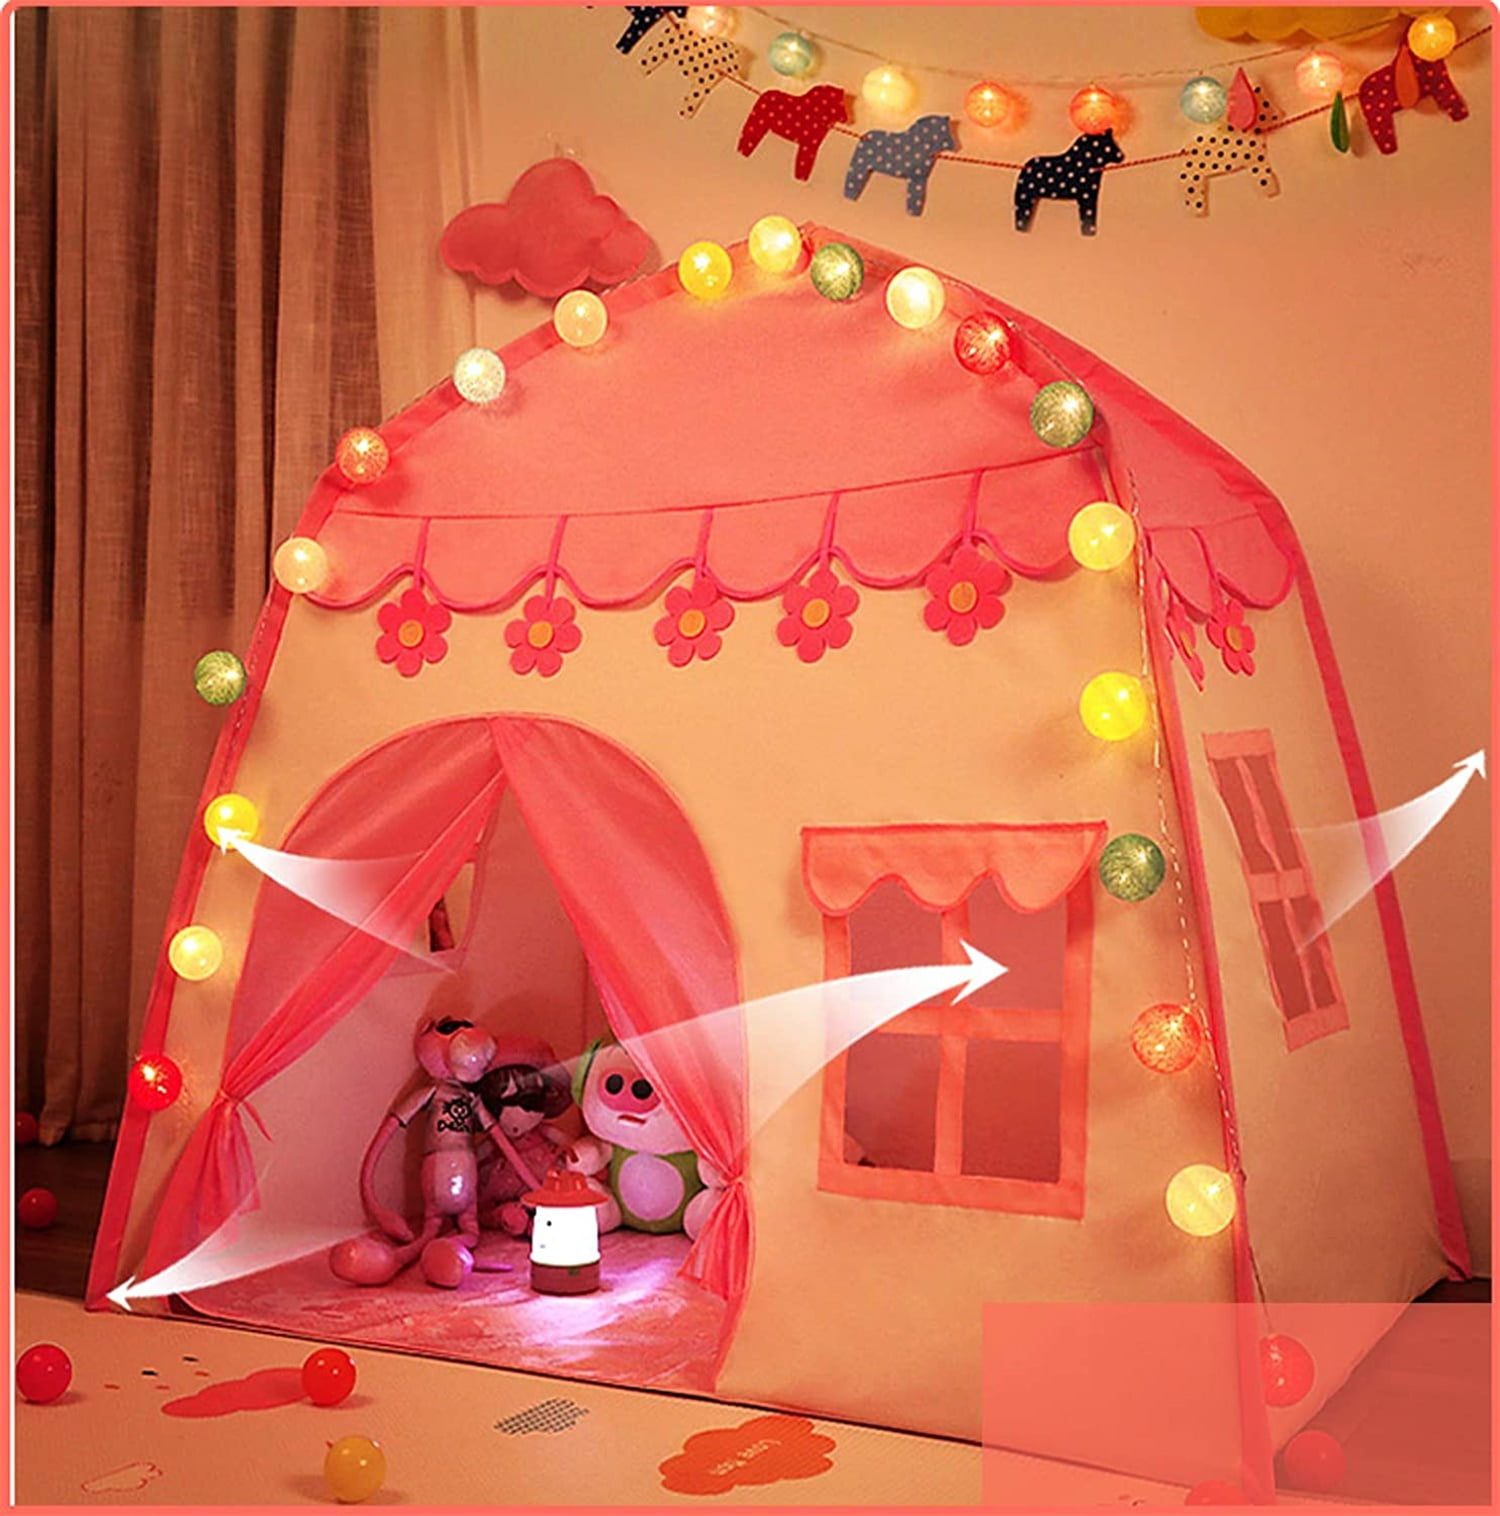 Details about   Teepee Kids Chiffon Curtain Bedding Princess Castle Party Wigwam Playtent D238 